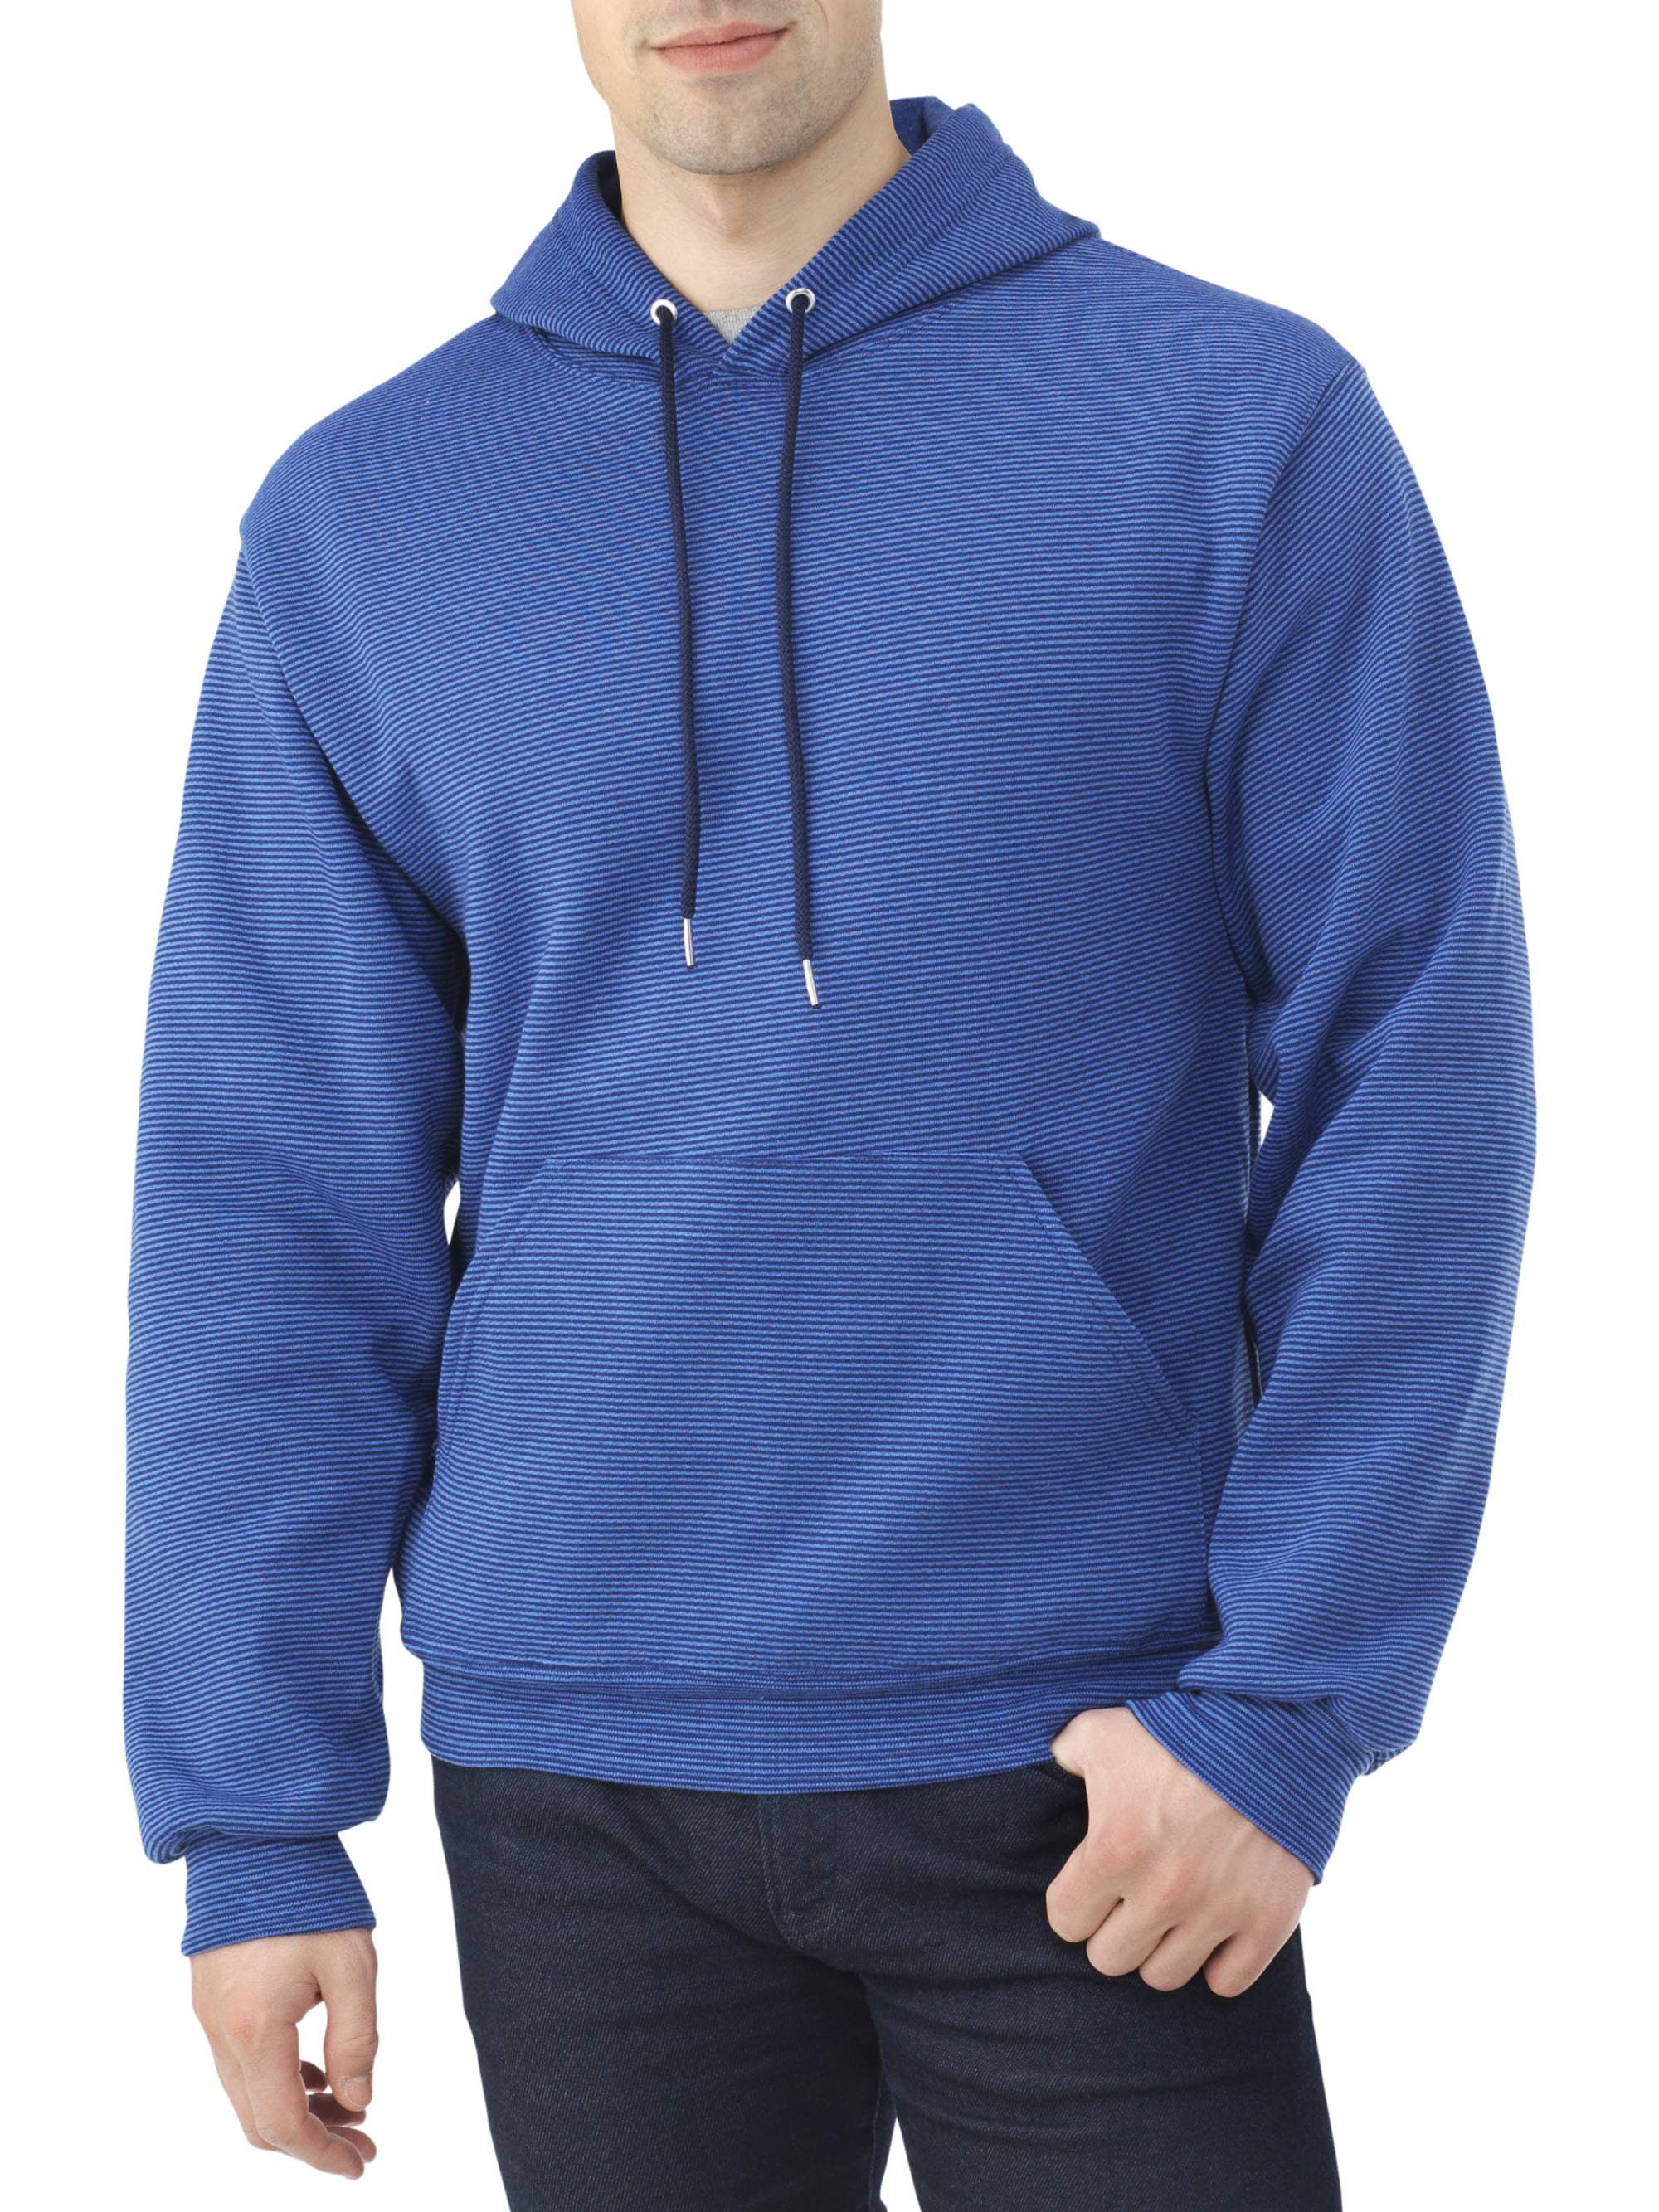 Several types of Sweatshirts for Men